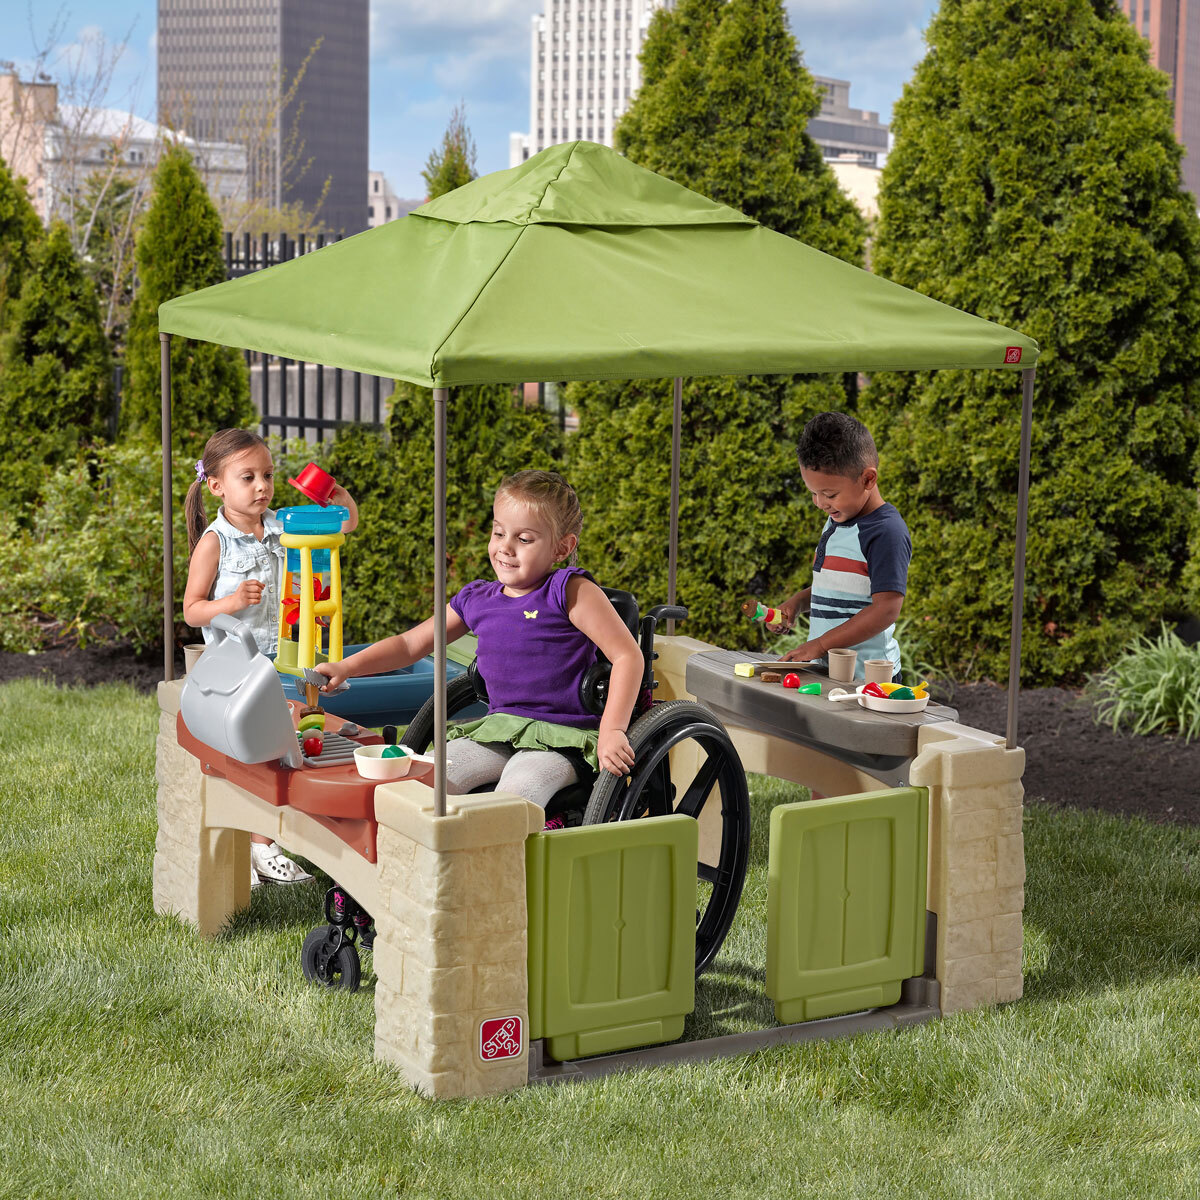 Buy All Around Playtime Patio with Canopy Lifestyle1 Image at Costco.co.uk